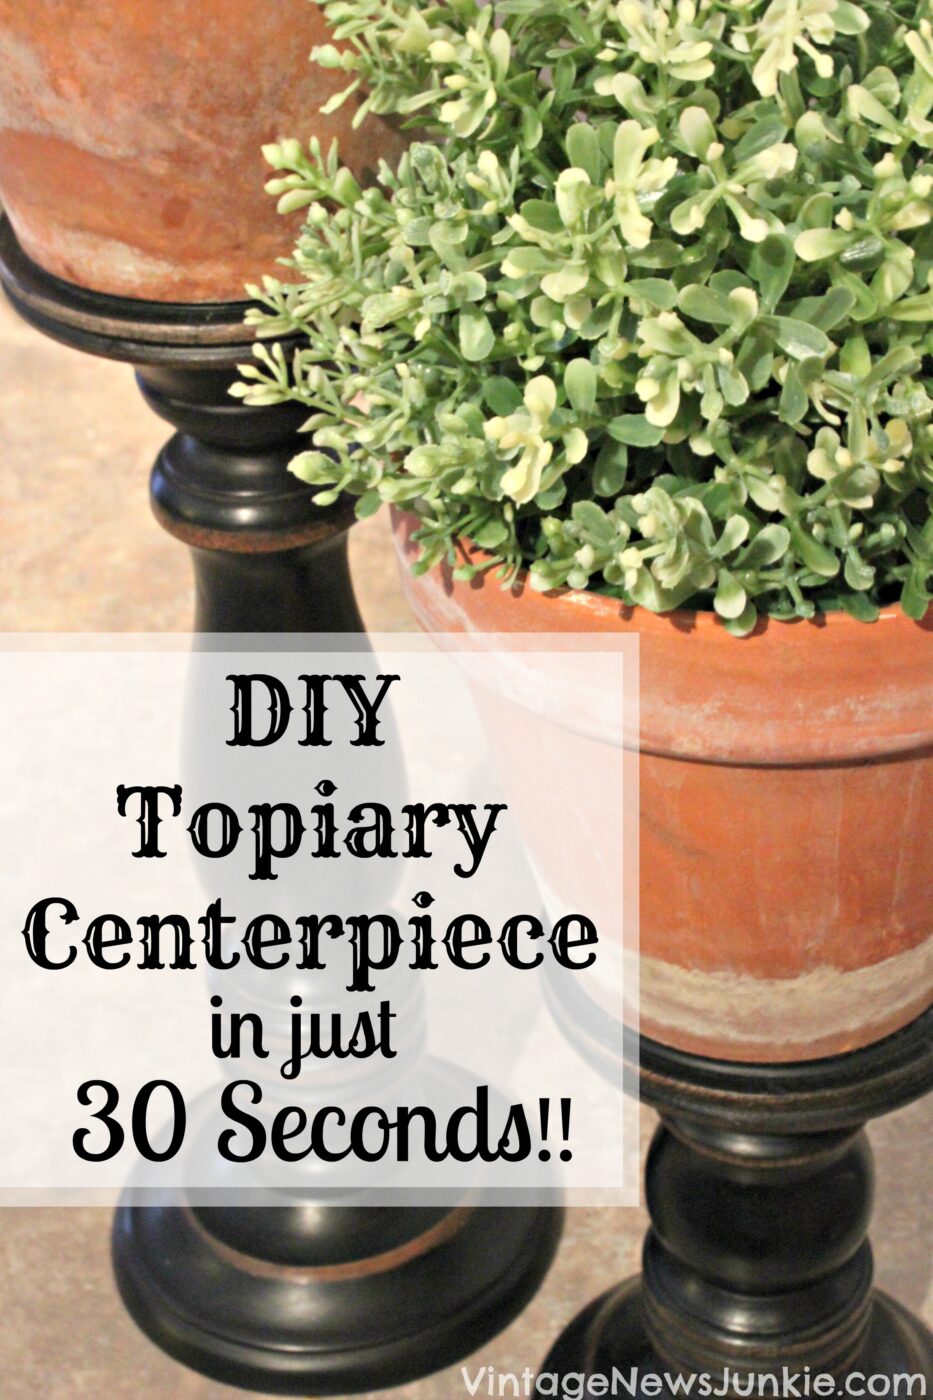 DIY Topiary Centerpiece in just 30 Seconds! | 25+ May Day ideas